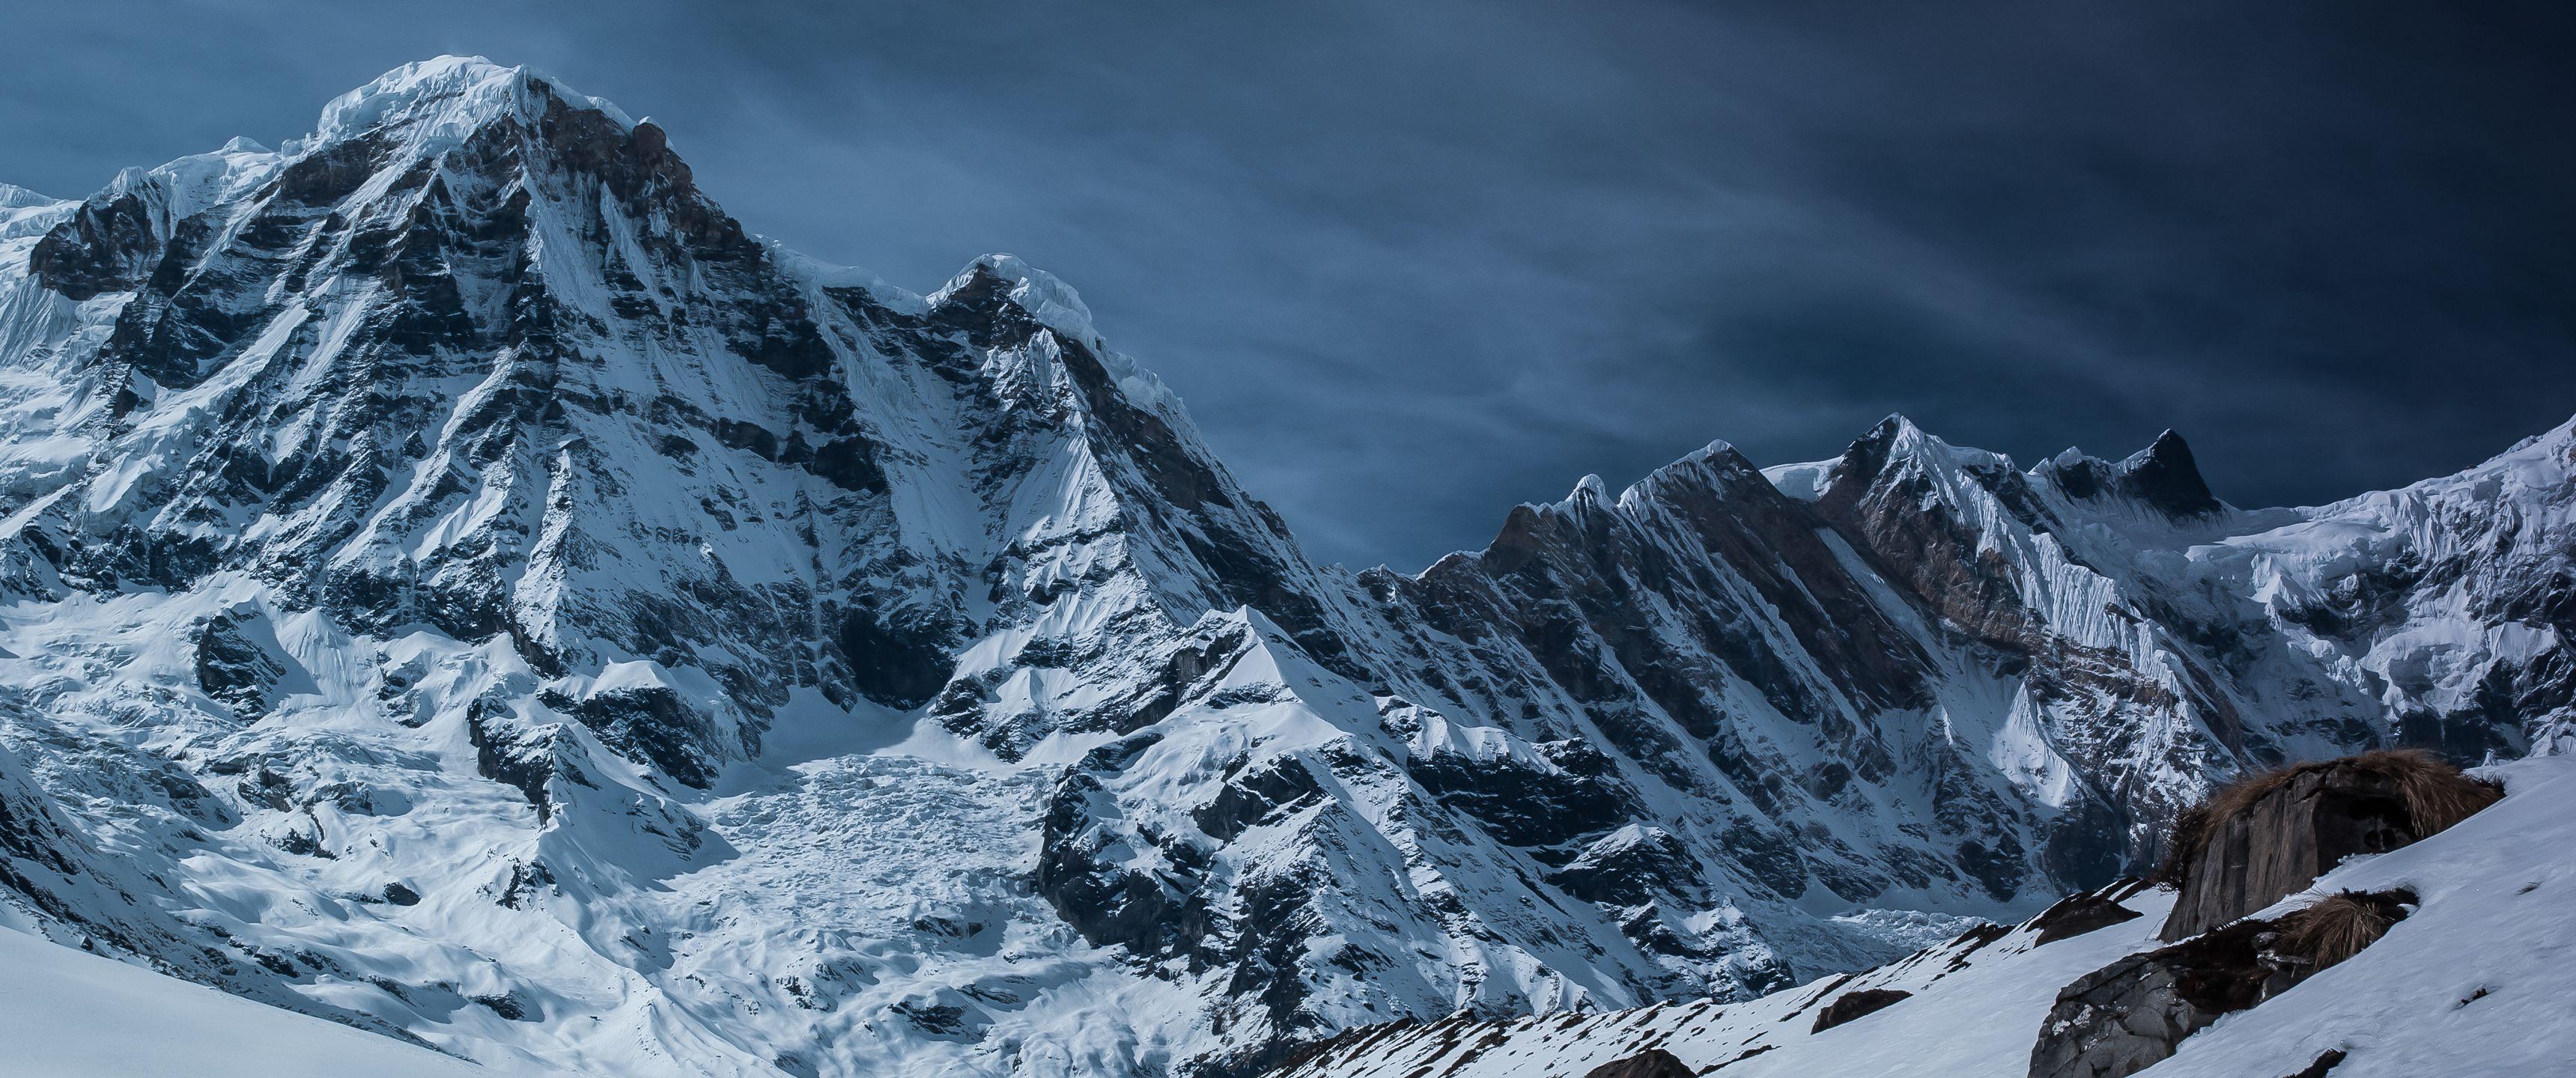 Snow Covered Mountains:9 Ultrawide HD Wallpaper (3440x1440). Background desktop, Background, 3440x1440 wallpaper